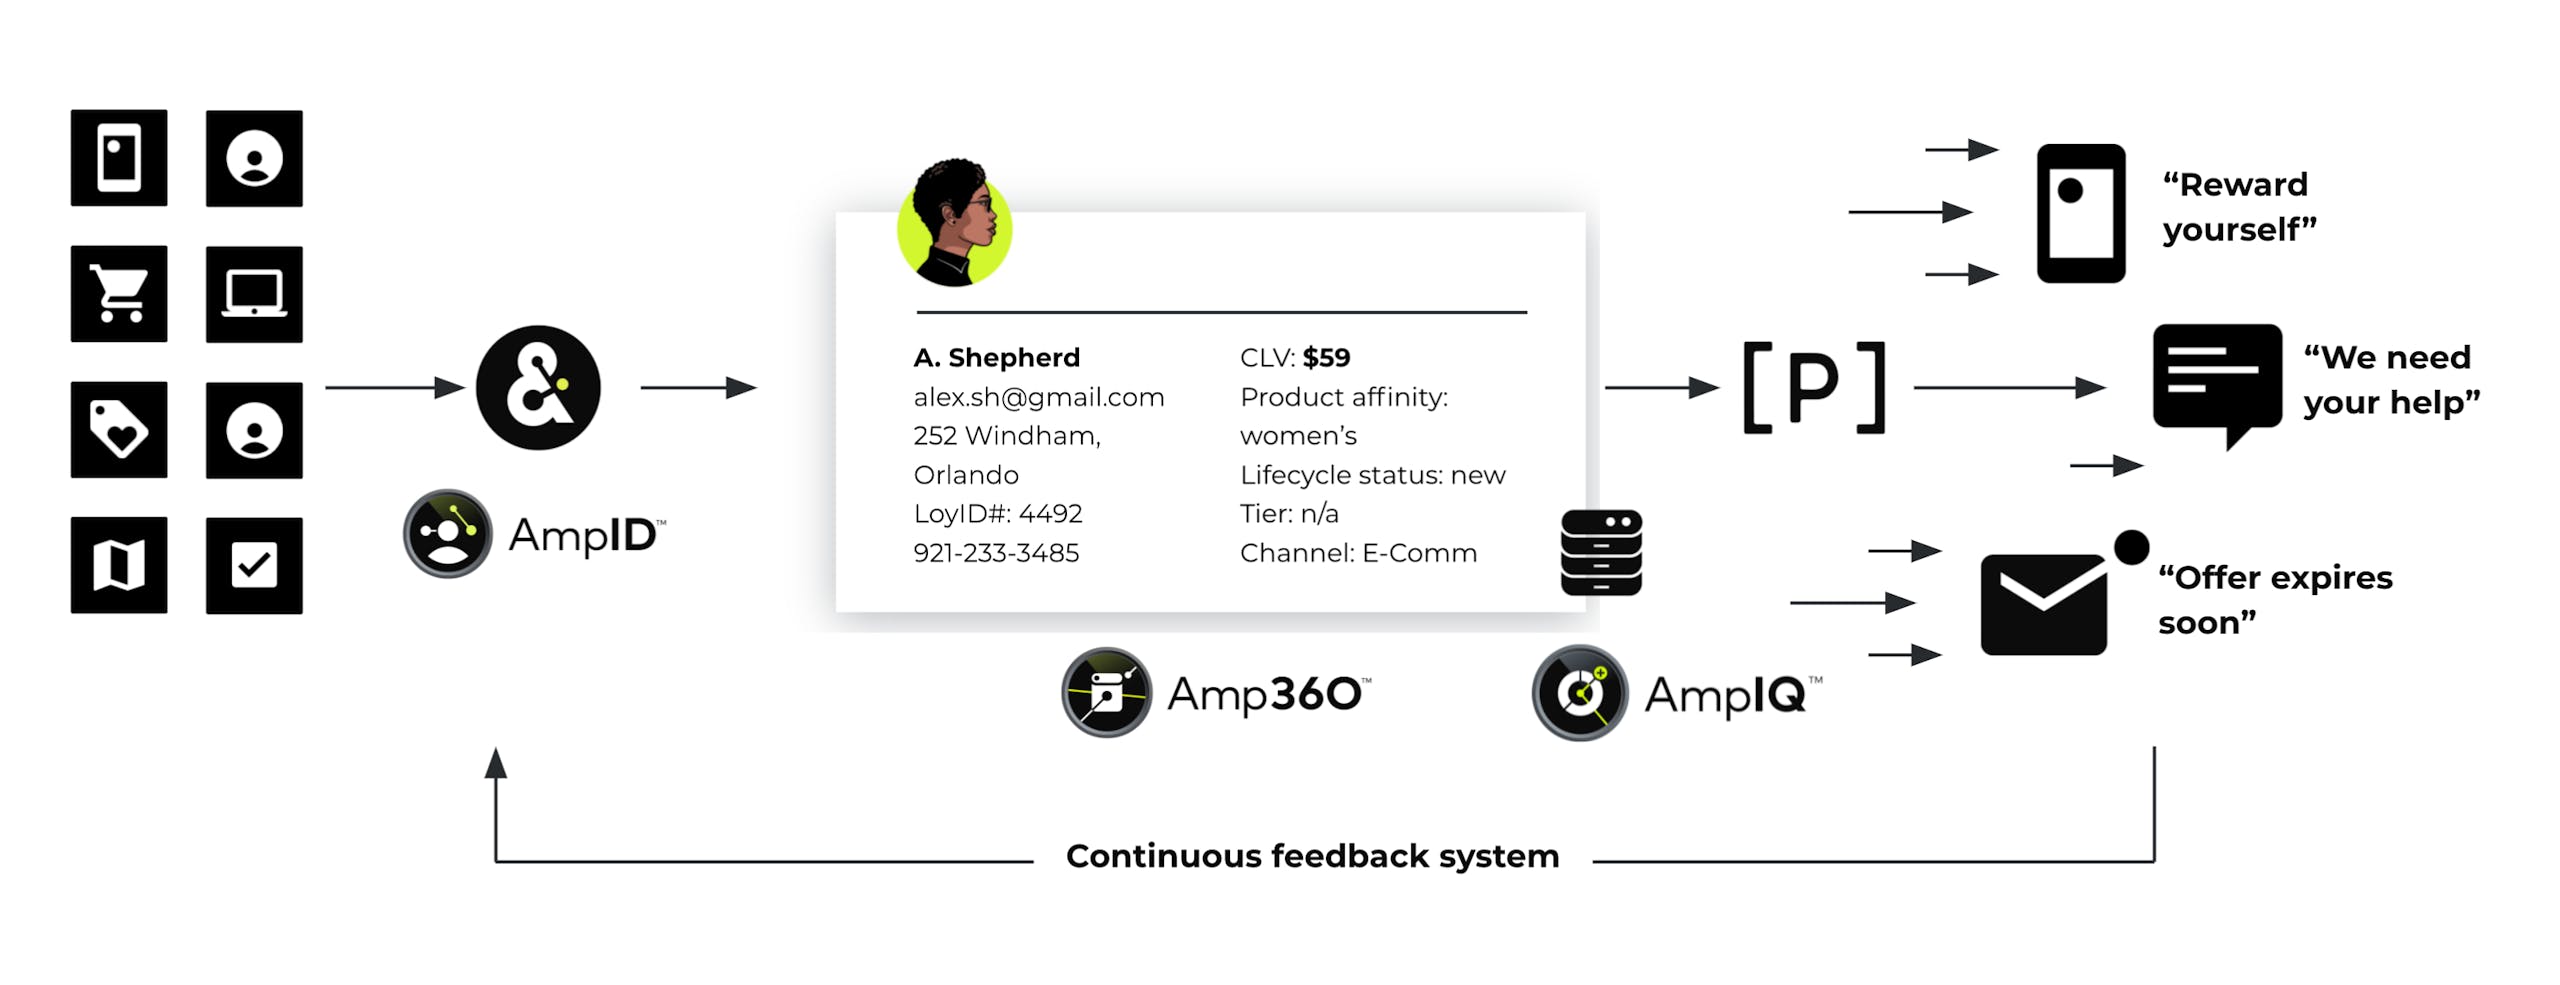 Diagram of continuous feedback system between AmpID, Amp360, and AmpIQ